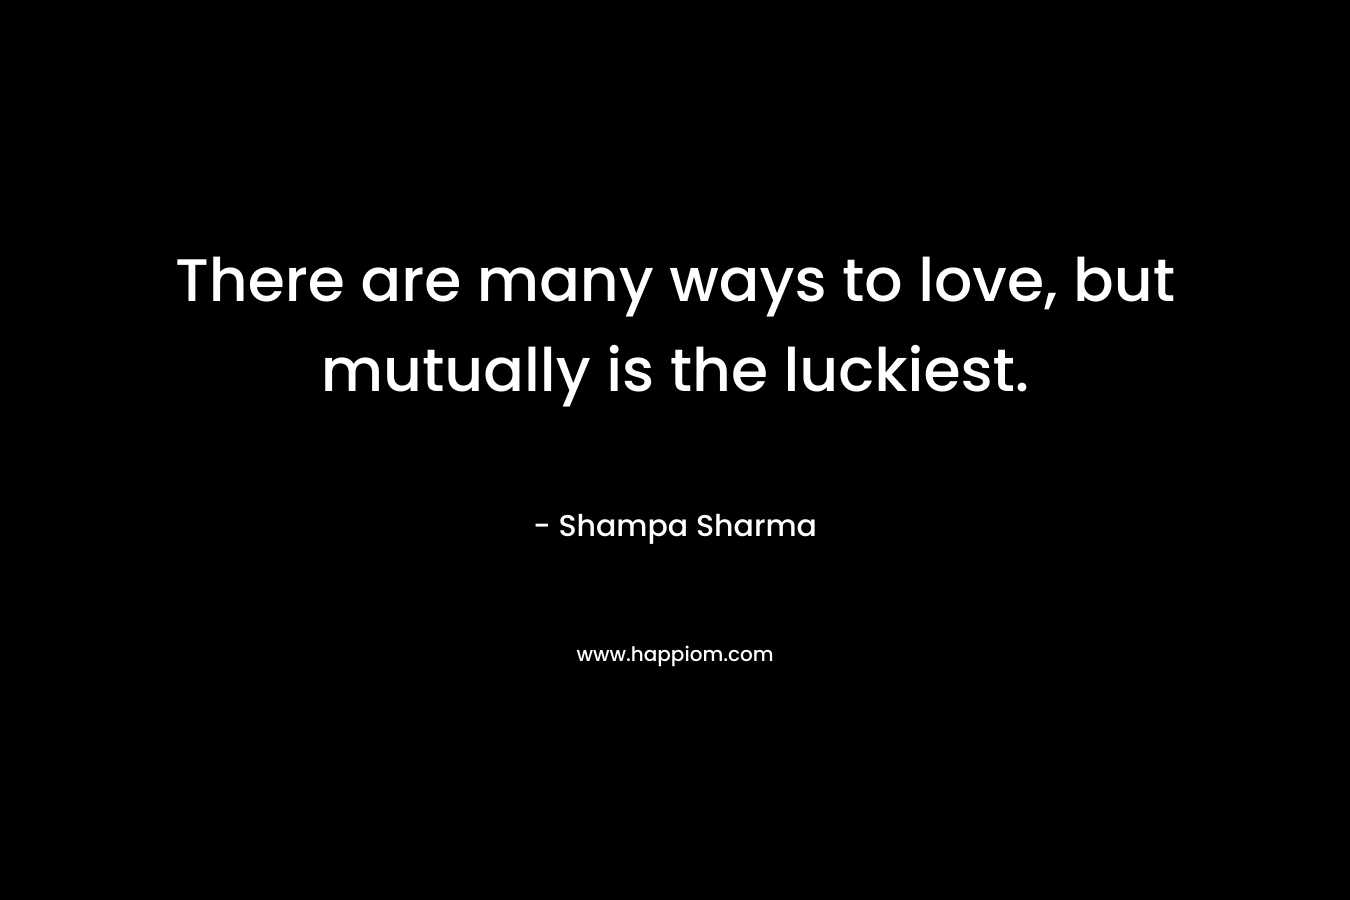 There are many ways to love, but mutually is the luckiest. – Shampa Sharma